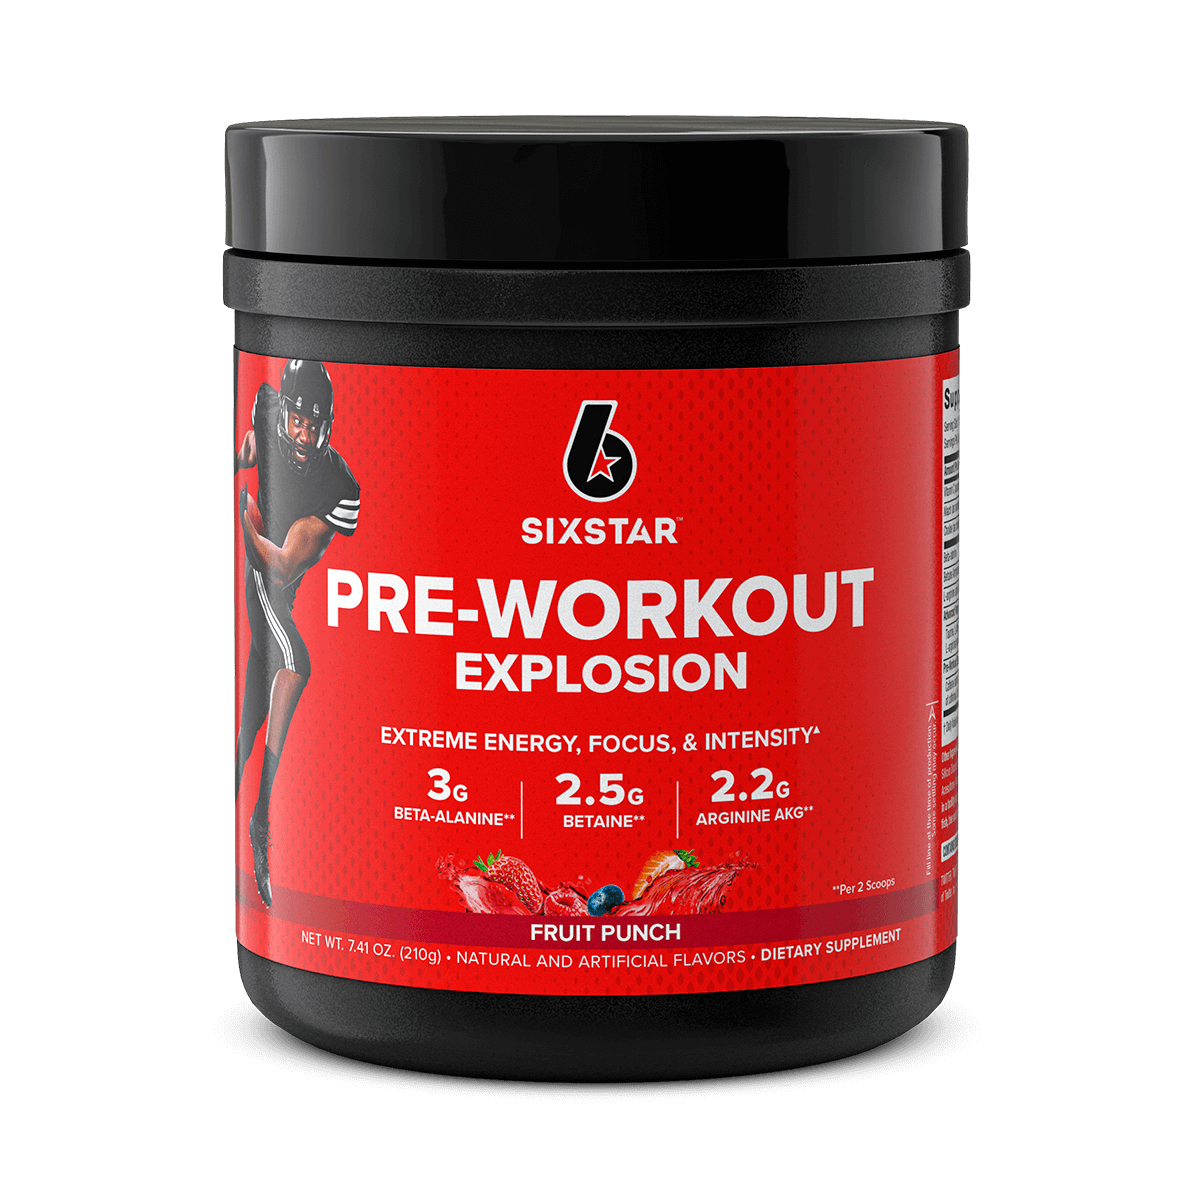 Pre-Workout Explosion - Fruit Punch (Front)